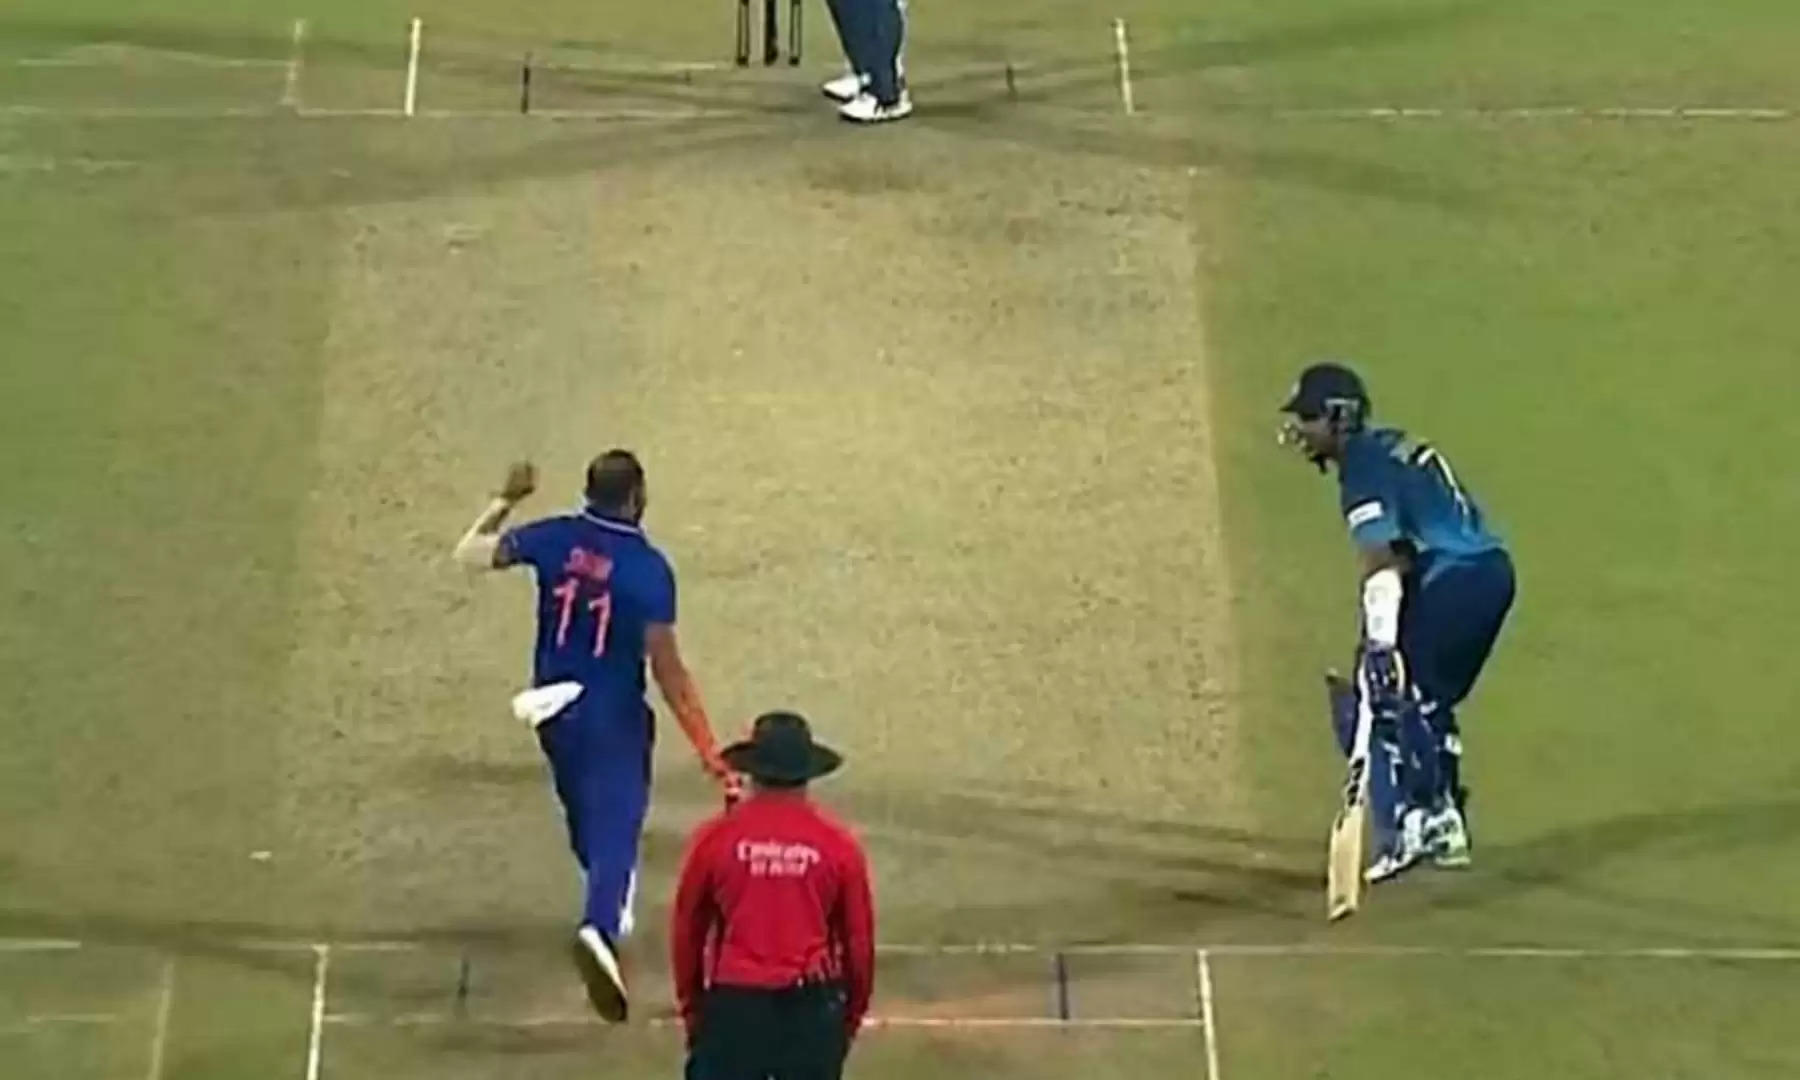 Mankad out